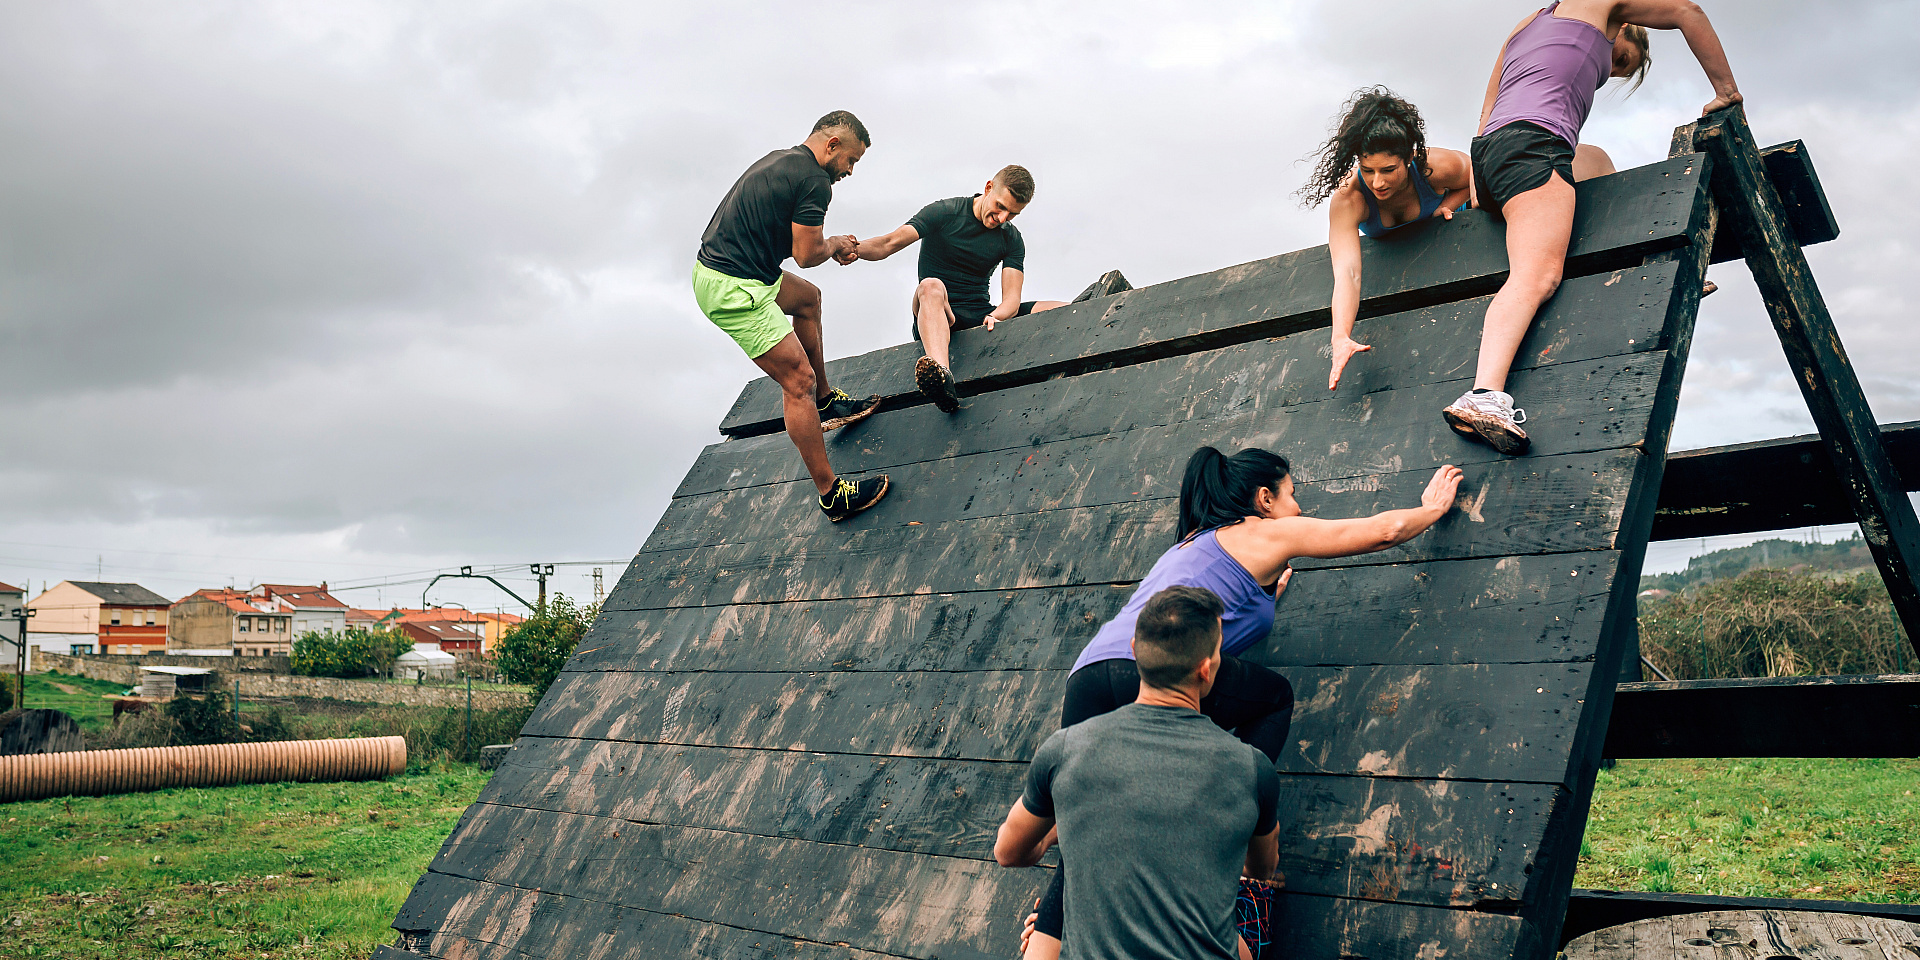 participants in obstacle course climbing pyramid